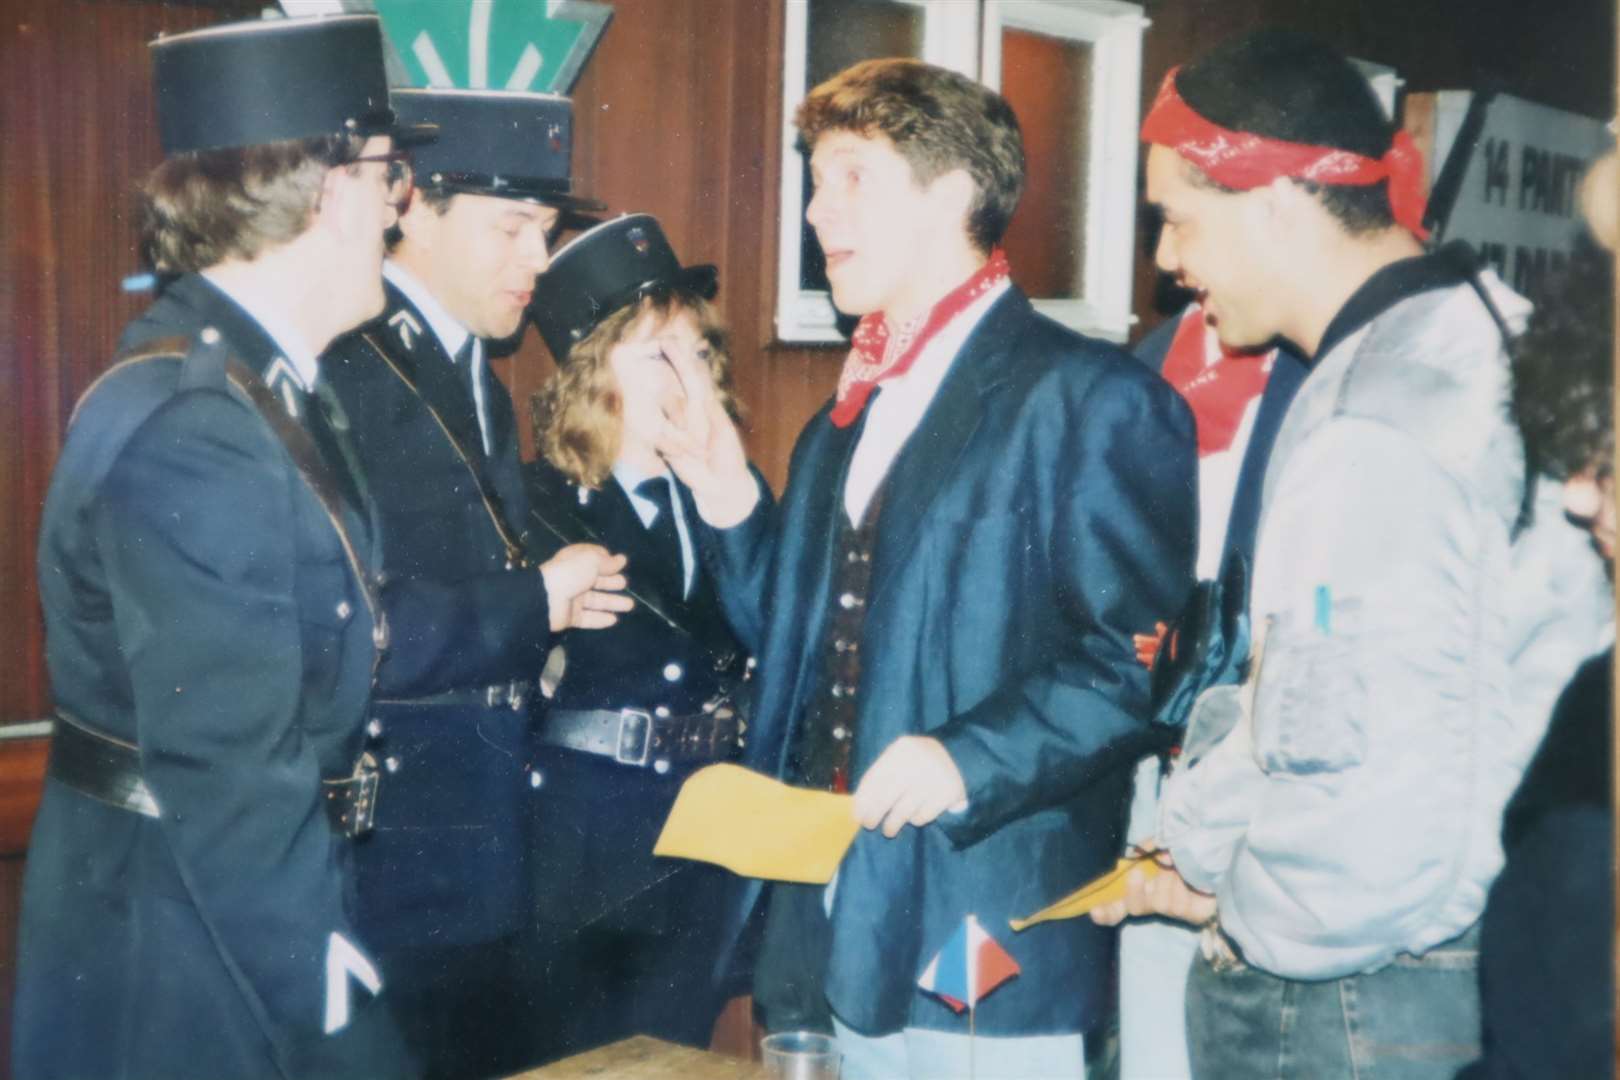 Neil Buchanan tries to evade 'customs' at a Motormouth 'wrap' party with Steve Johnson. Producer Vanessa Hill is dressed as a security guard. Made at the TVS studios in Maidstone